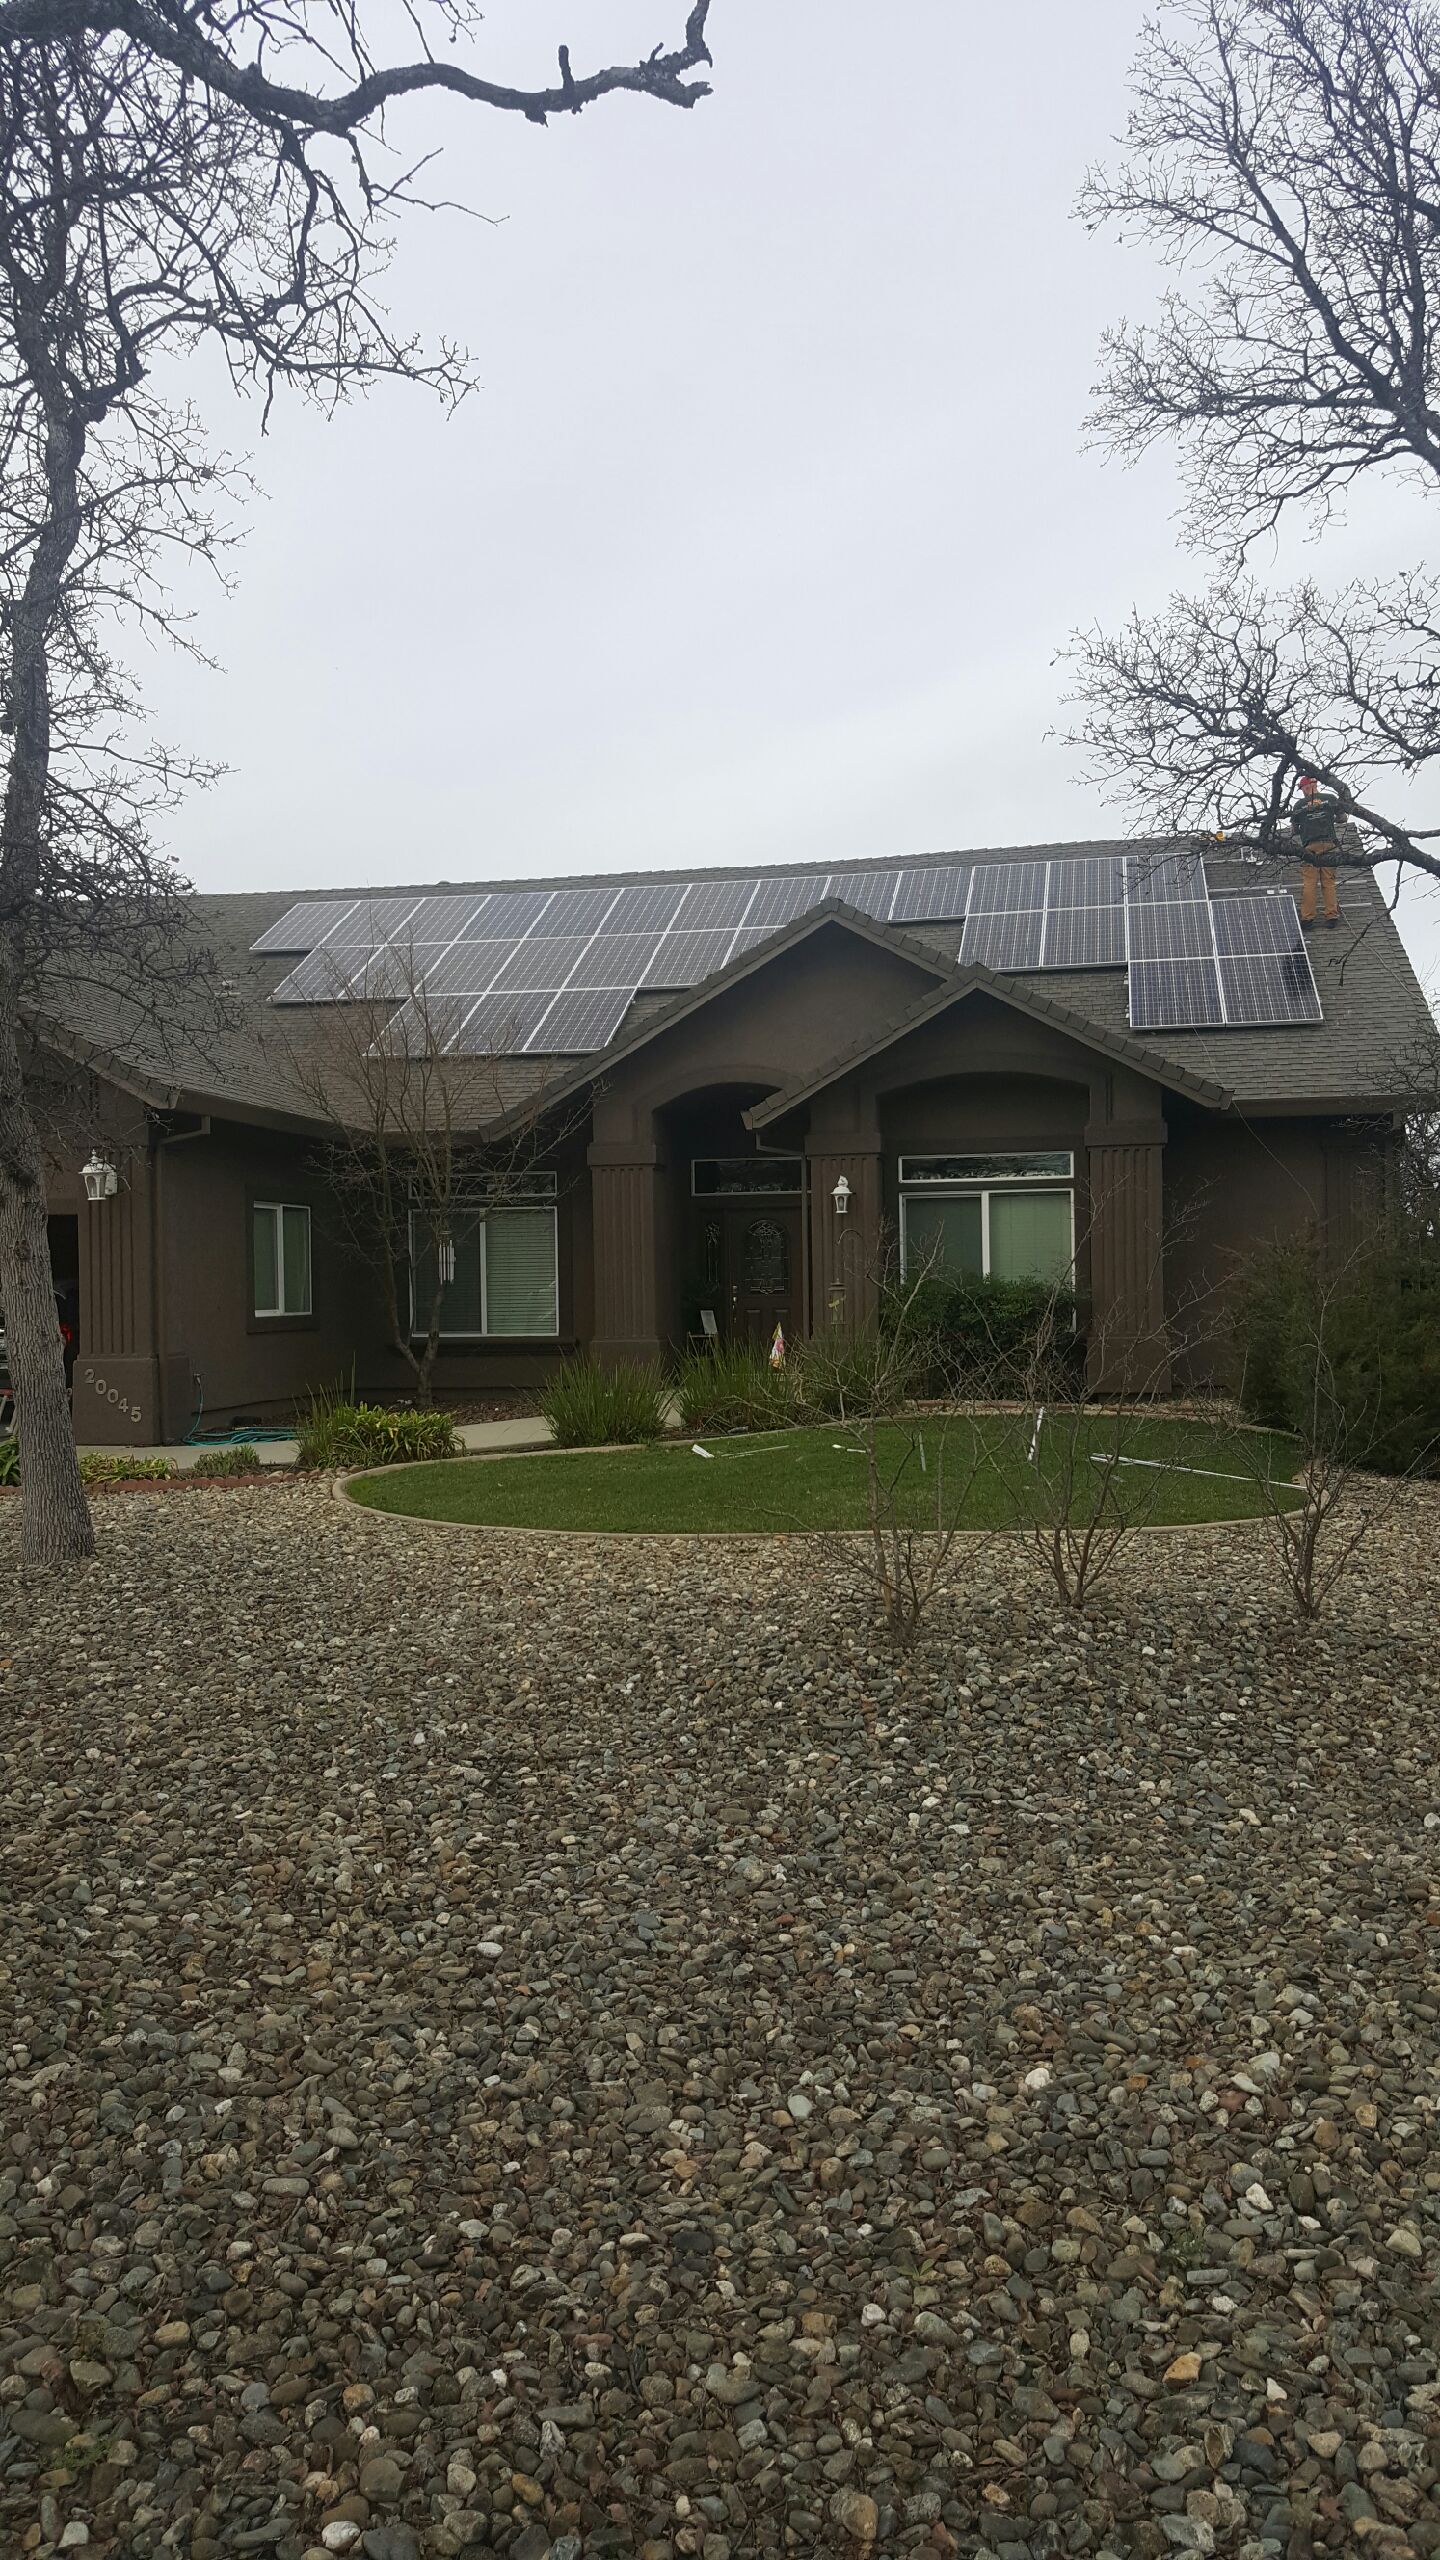 chico-solar-works-chico-roofing-solar-reviews-complaints-address